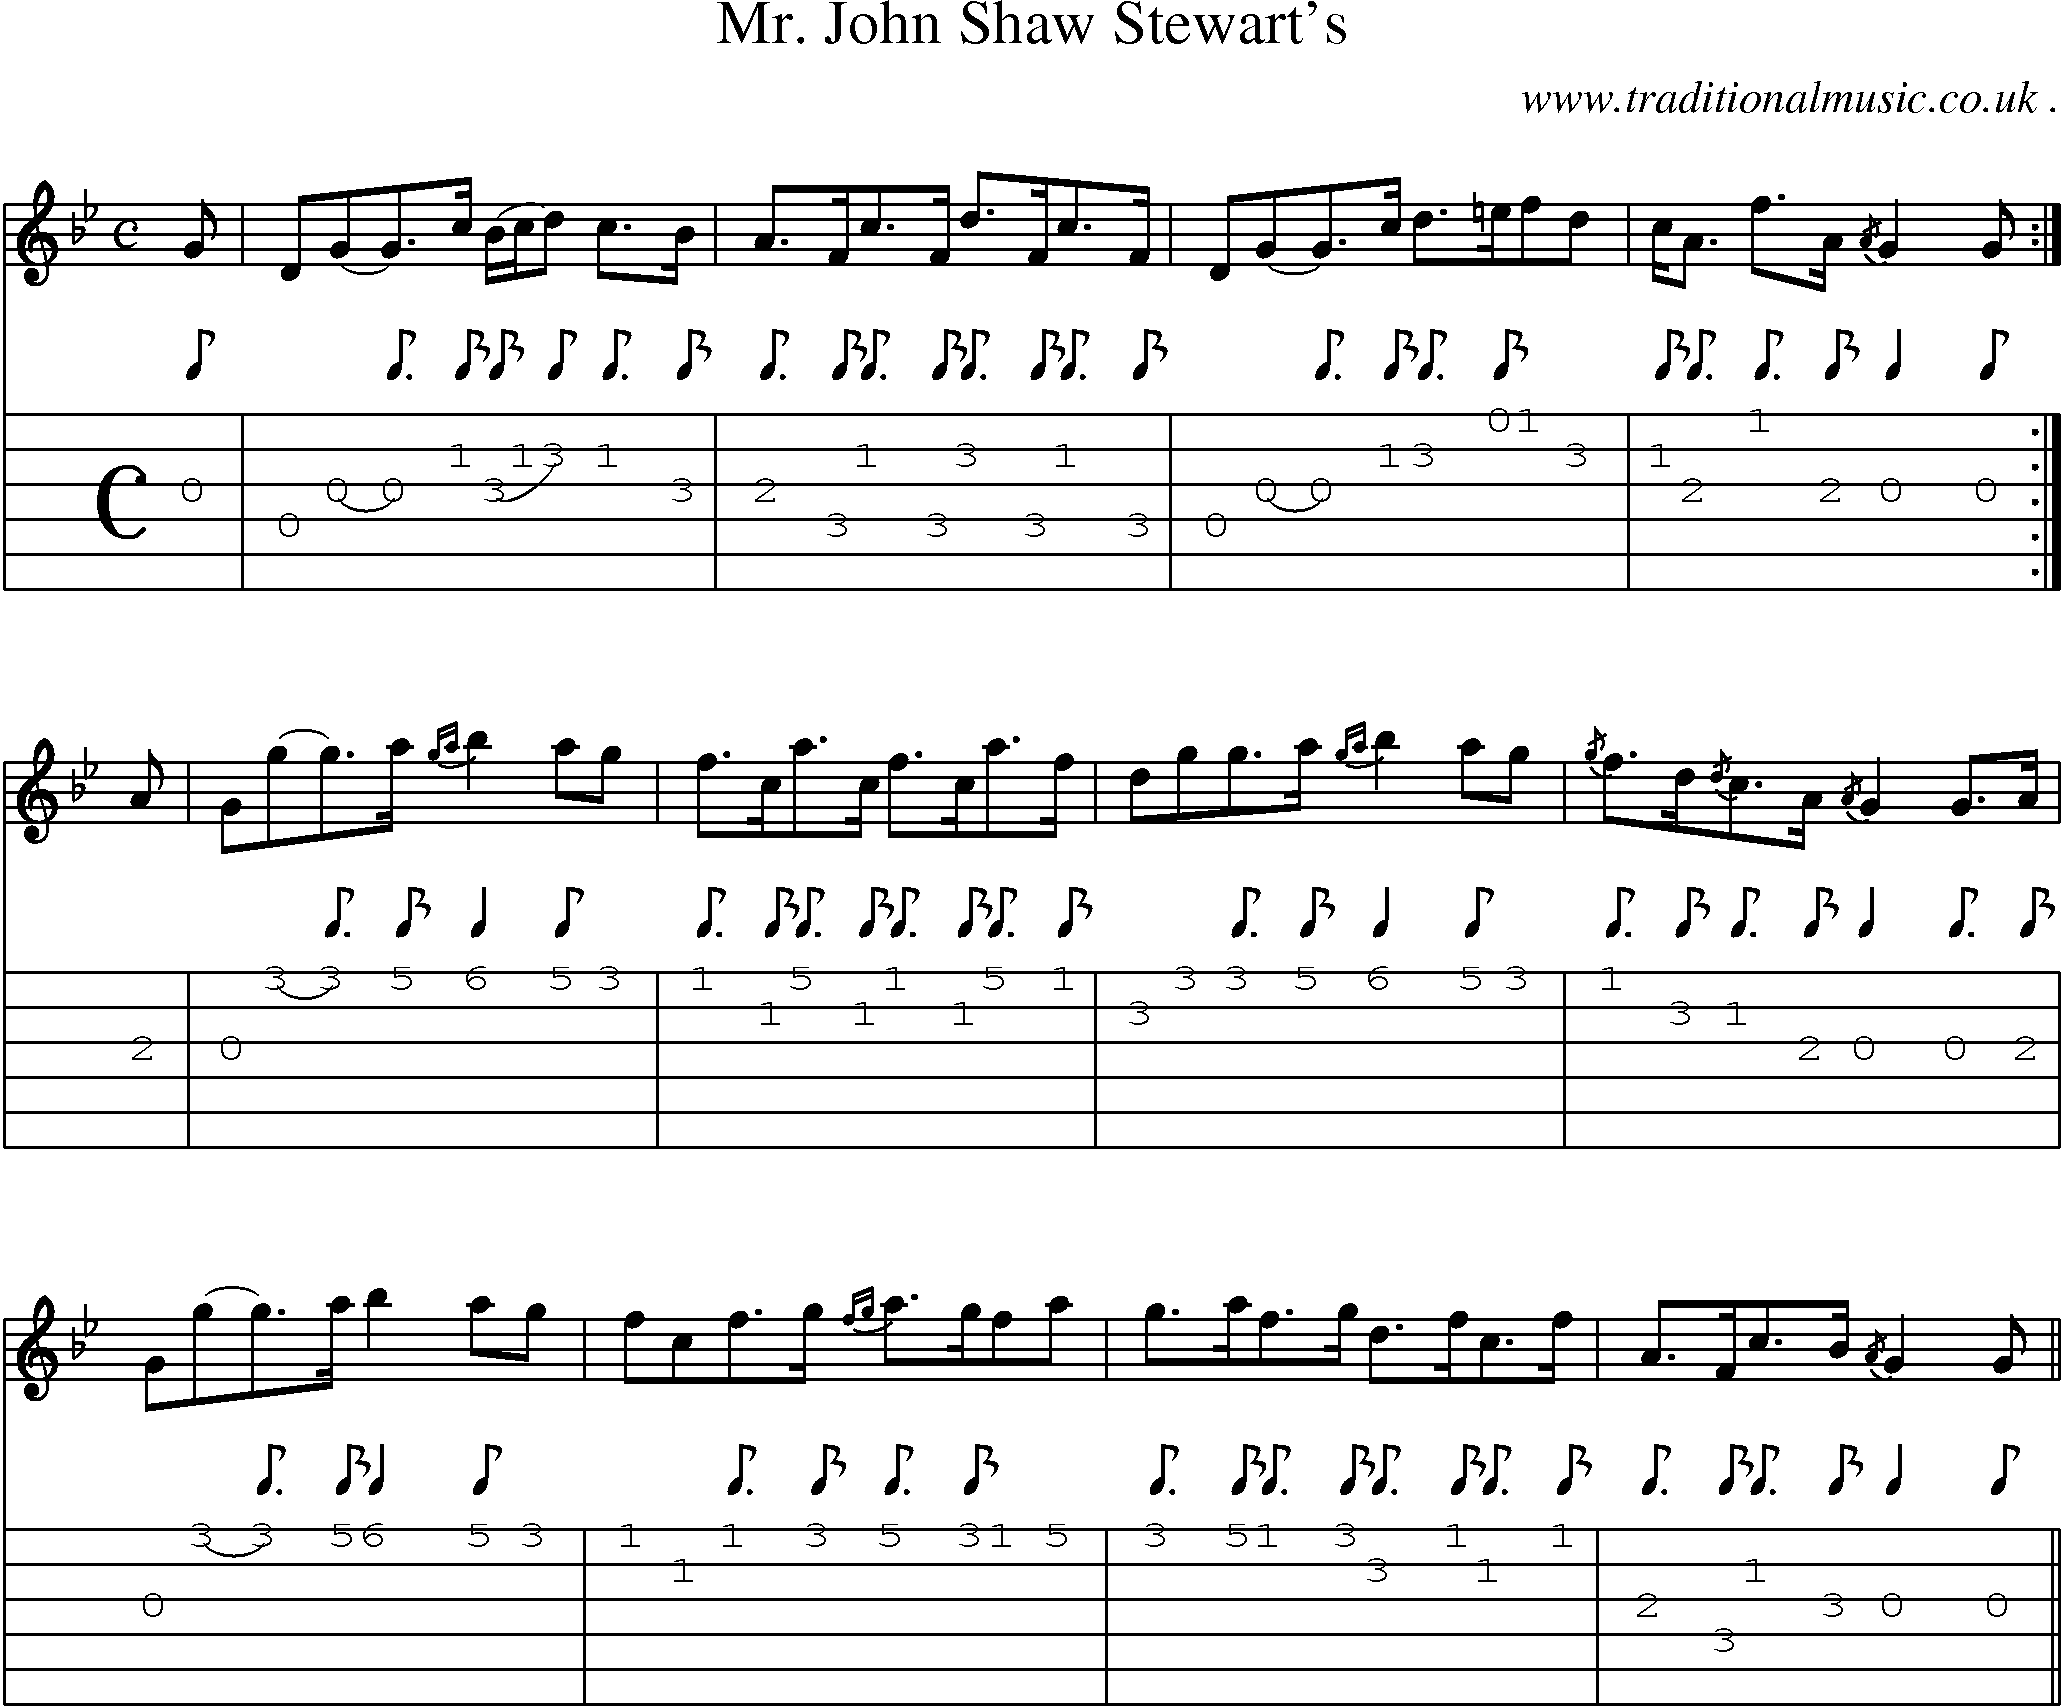 Sheet-music  score, Chords and Guitar Tabs for Mr John Shaw Stewarts